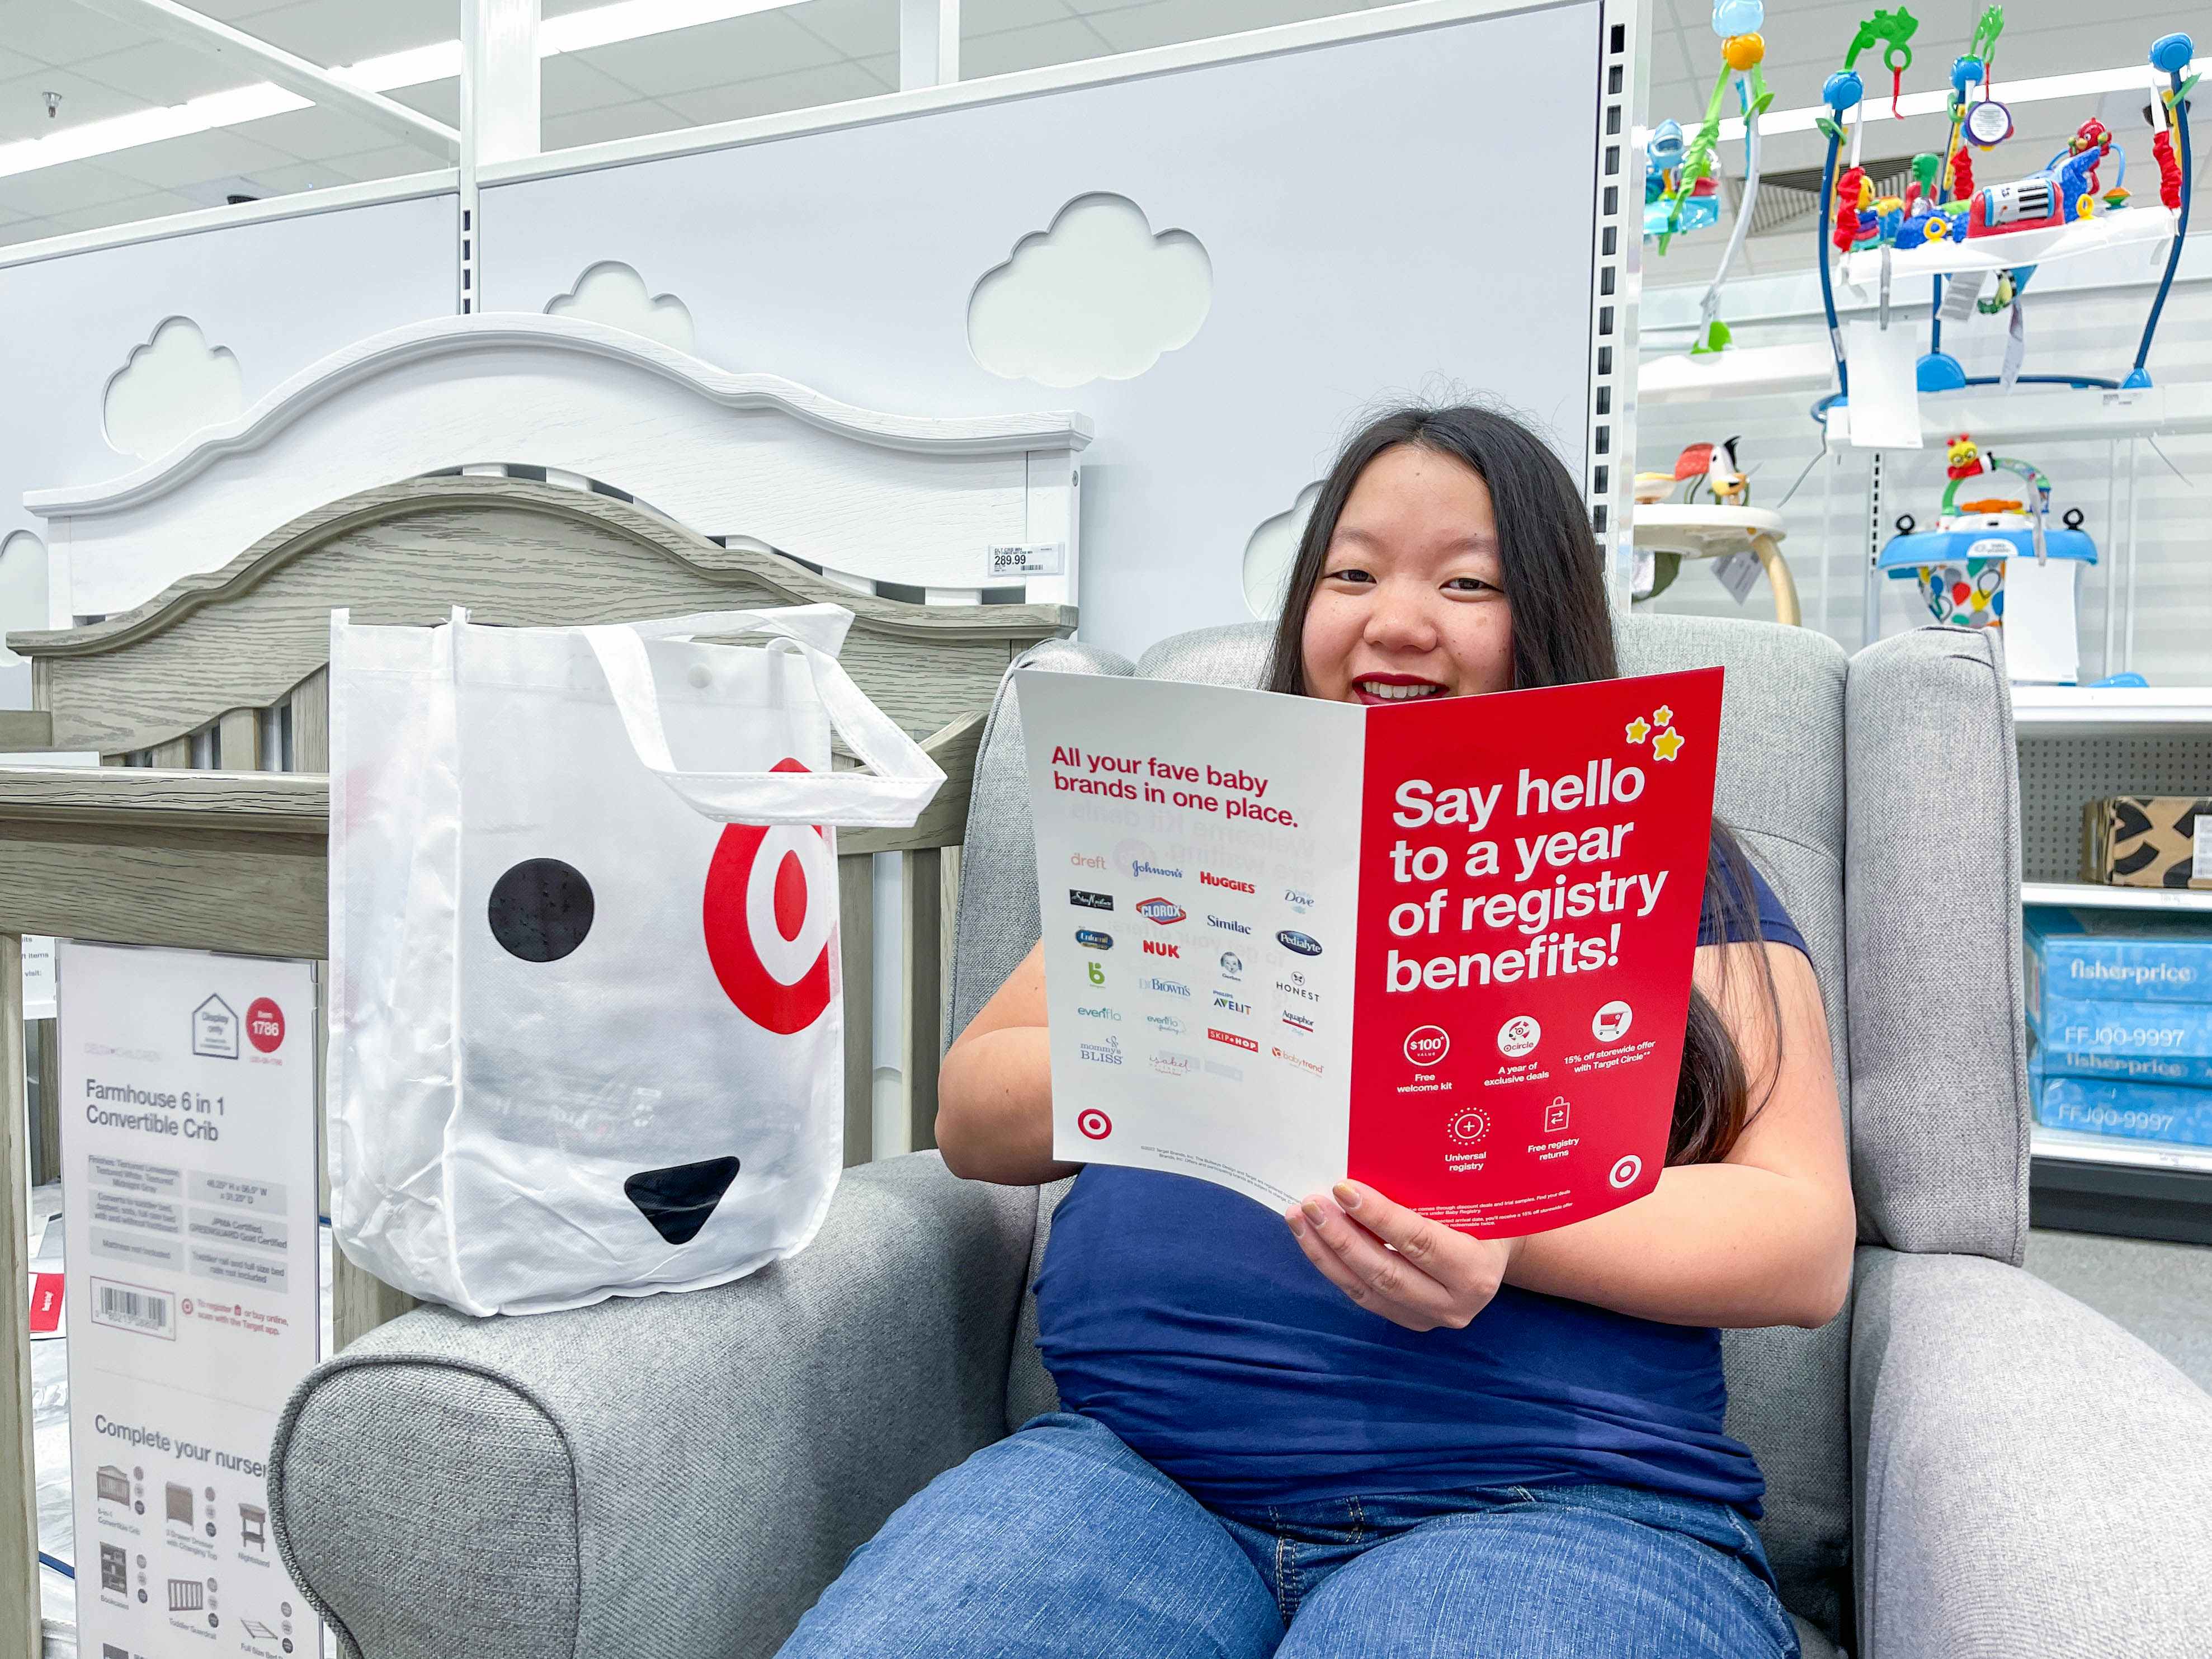 a woman sitting down with a target baby registry welcome bag and brochure